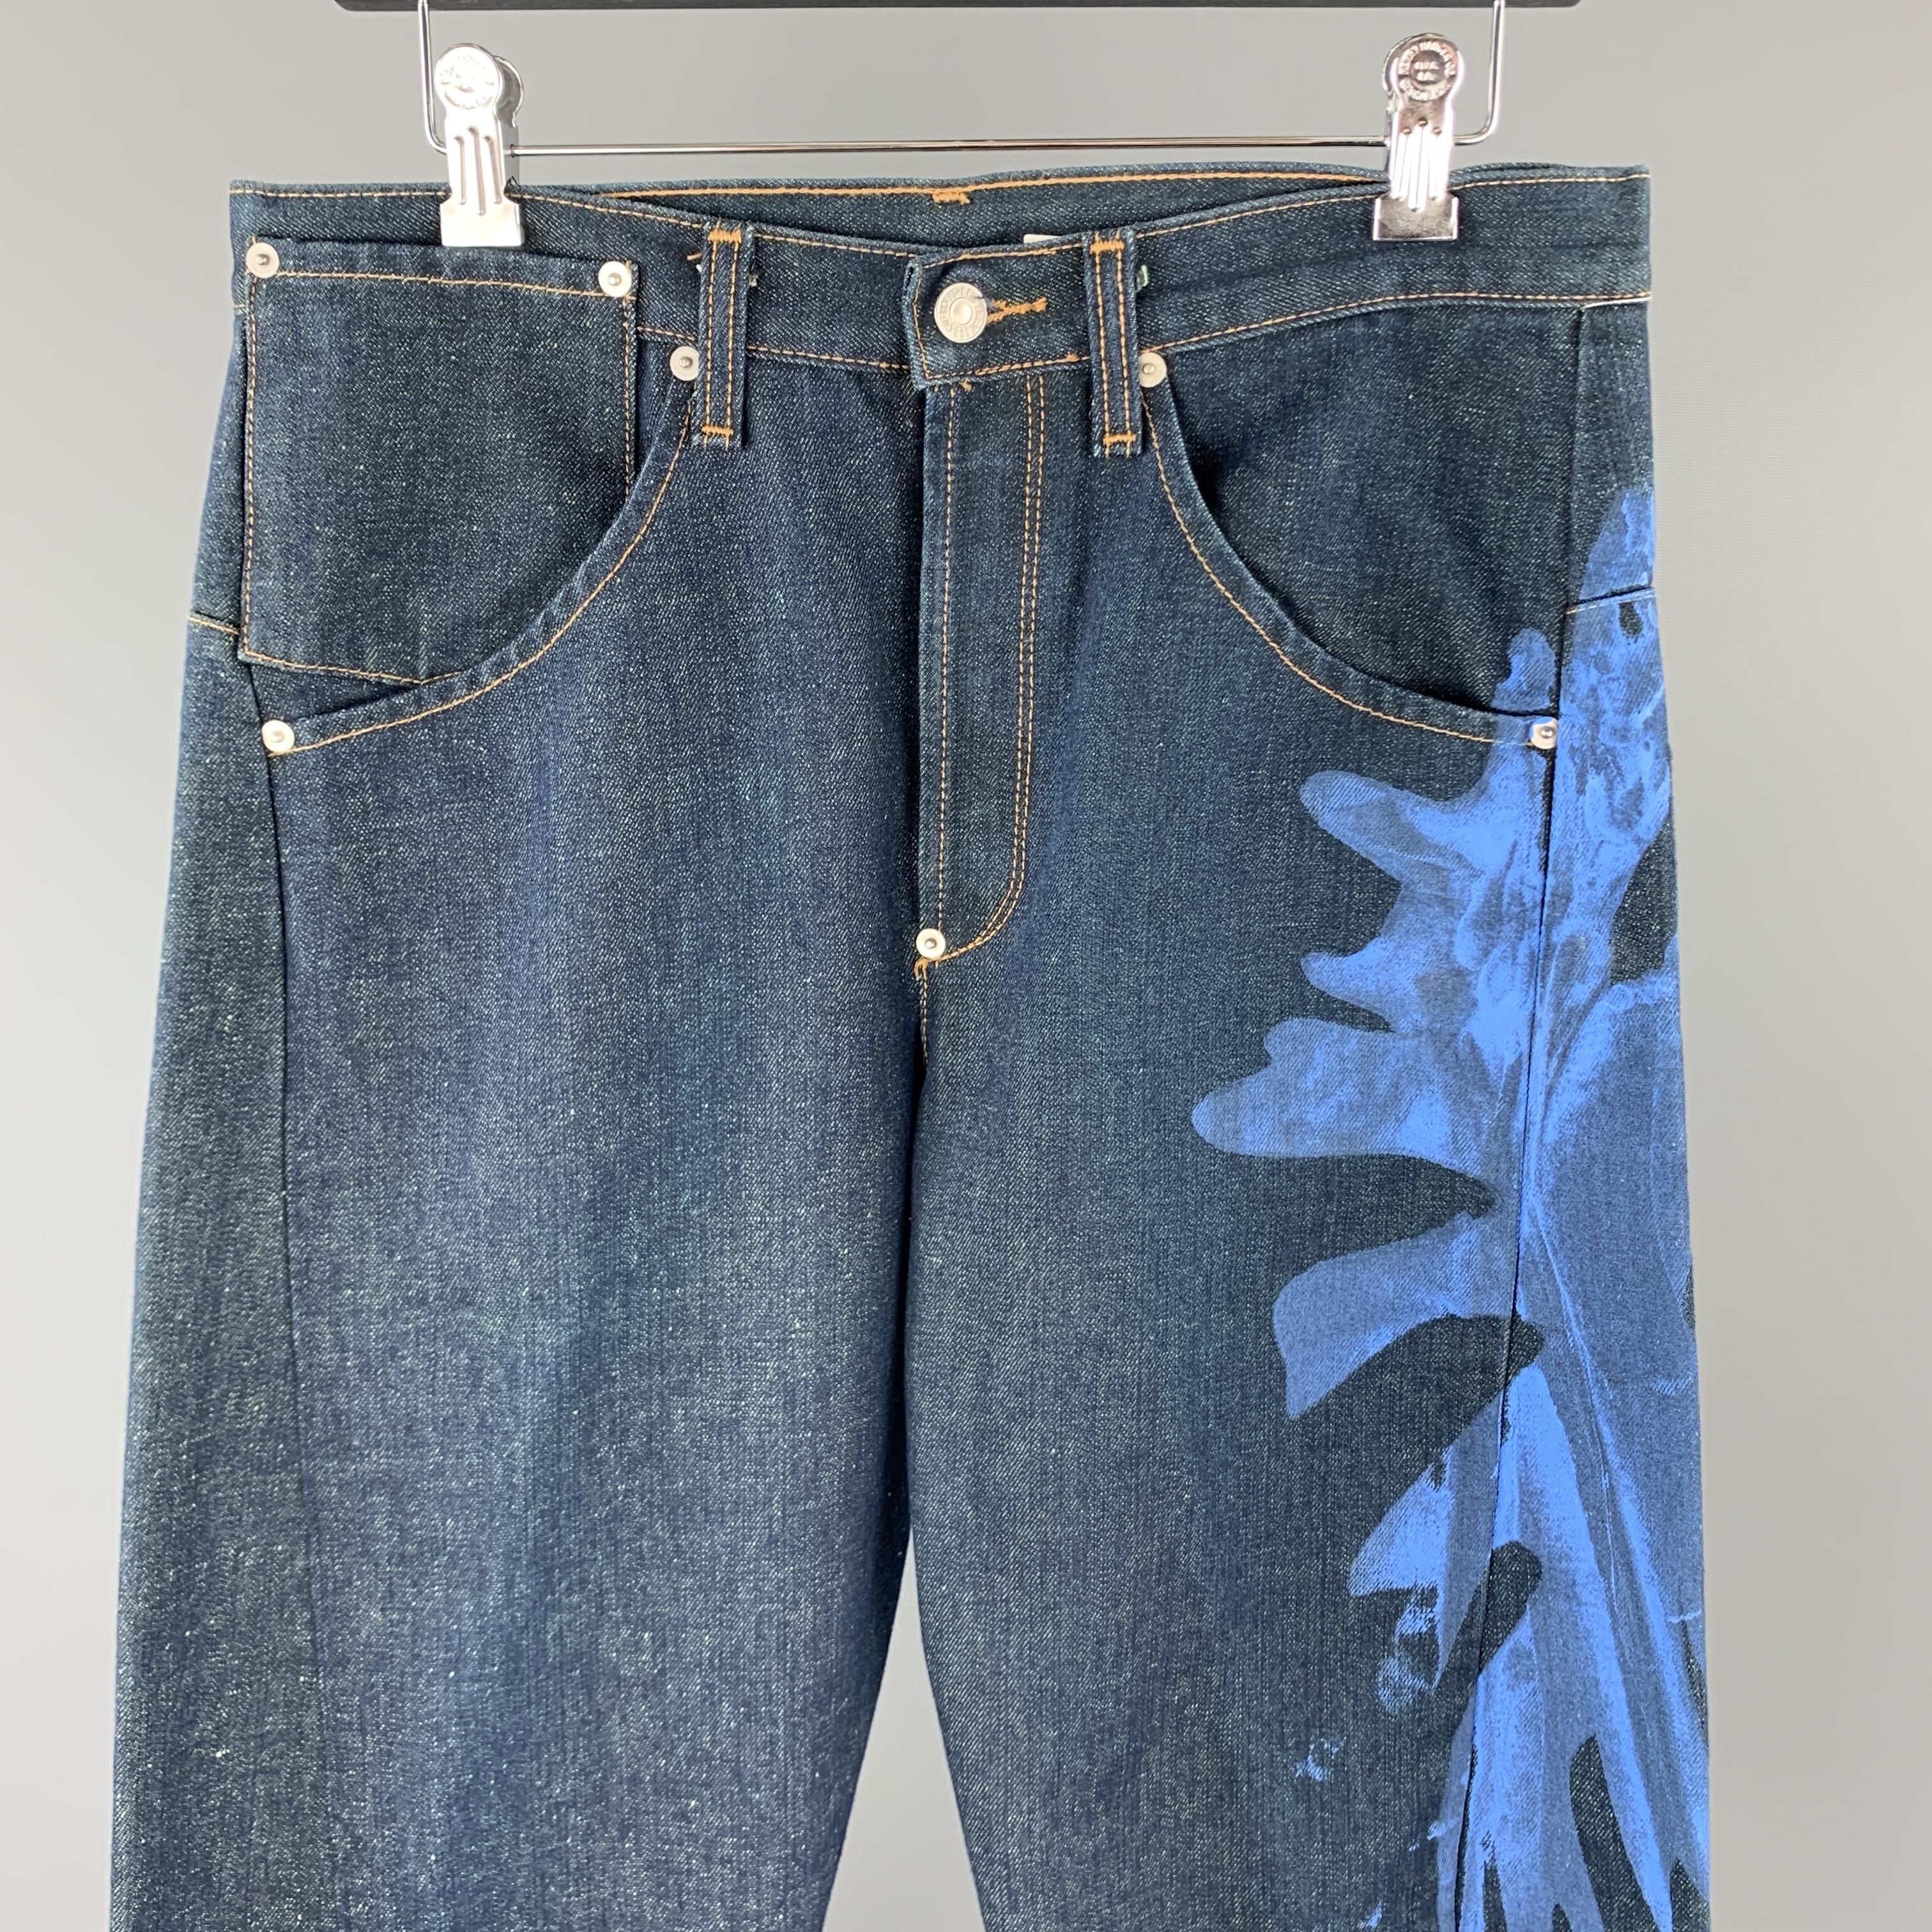 LEVI'S sample jeans come in indigo blue cotton denim with a button fly, diagonal seams, and blue paint splatter side. 

Excellent Pre-Owned Condition.
Marked:

Measurements:

Waist: 33 in.
Rise: 12.5 in.
Inseam: 32 in.